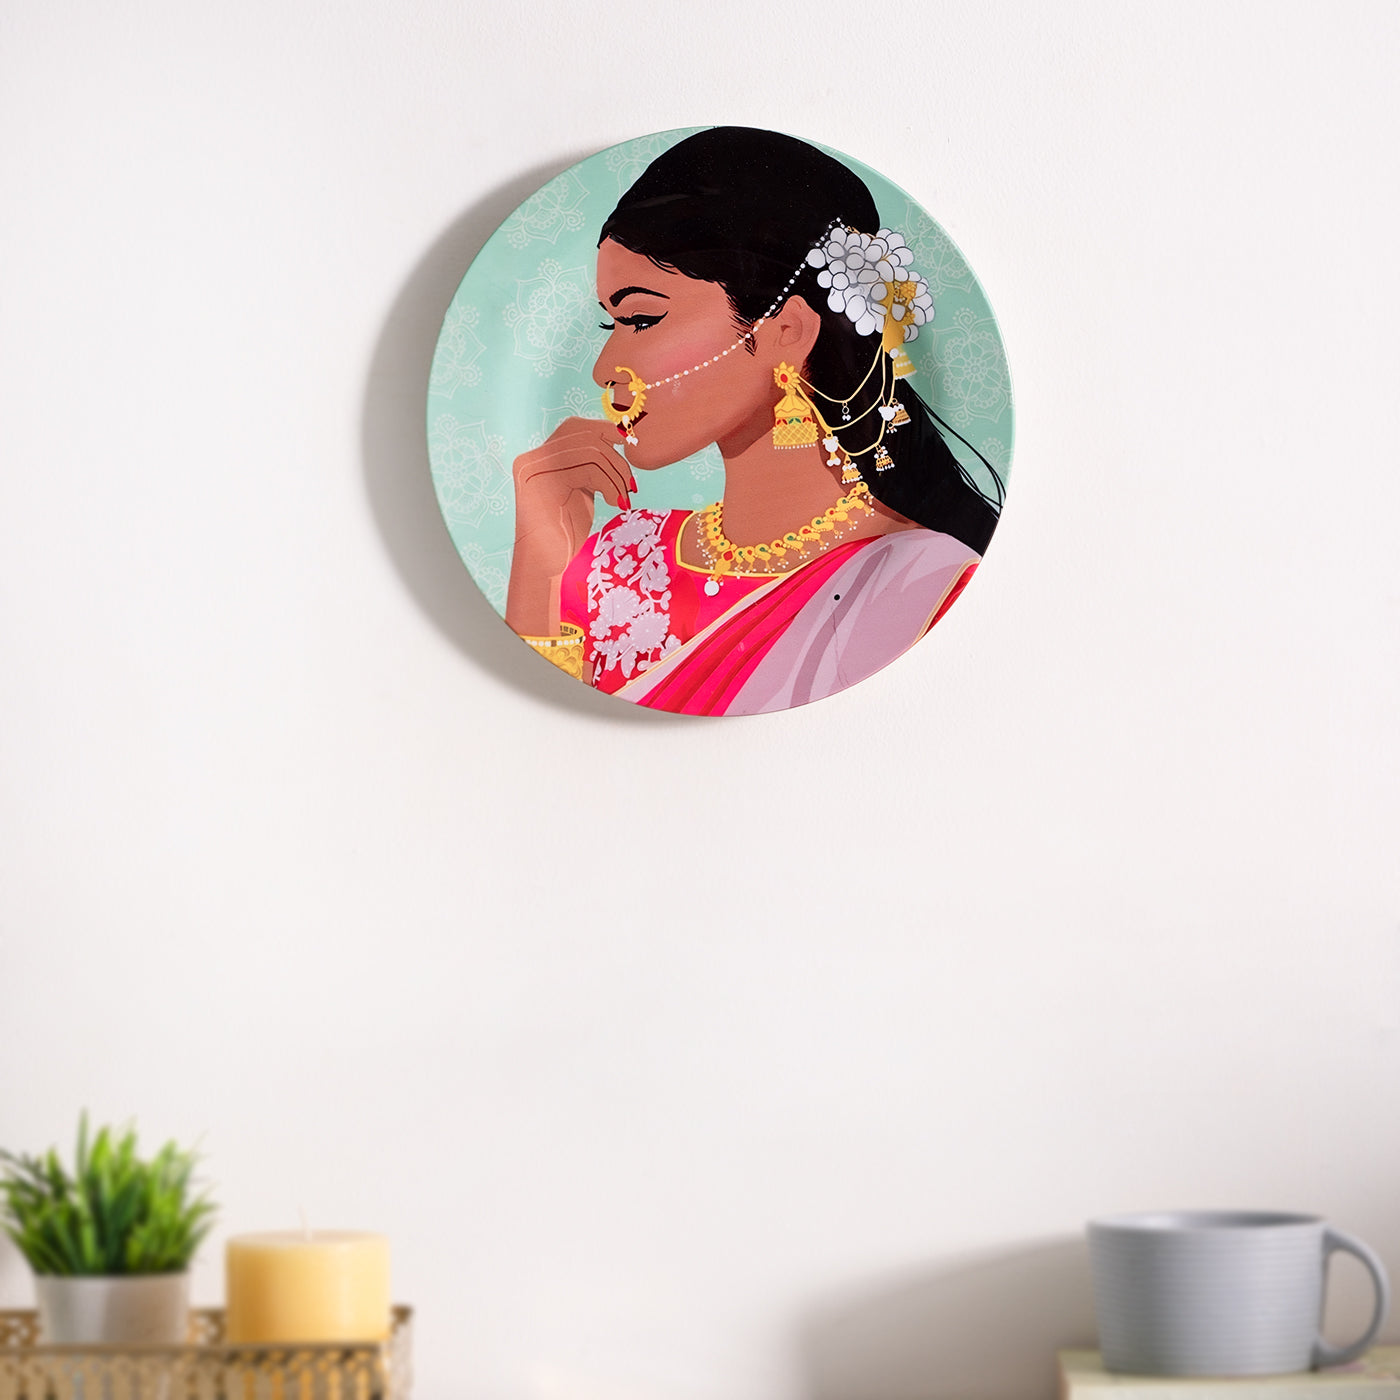 Beauty and U Ceramic wall plates decor hanging / tabletop